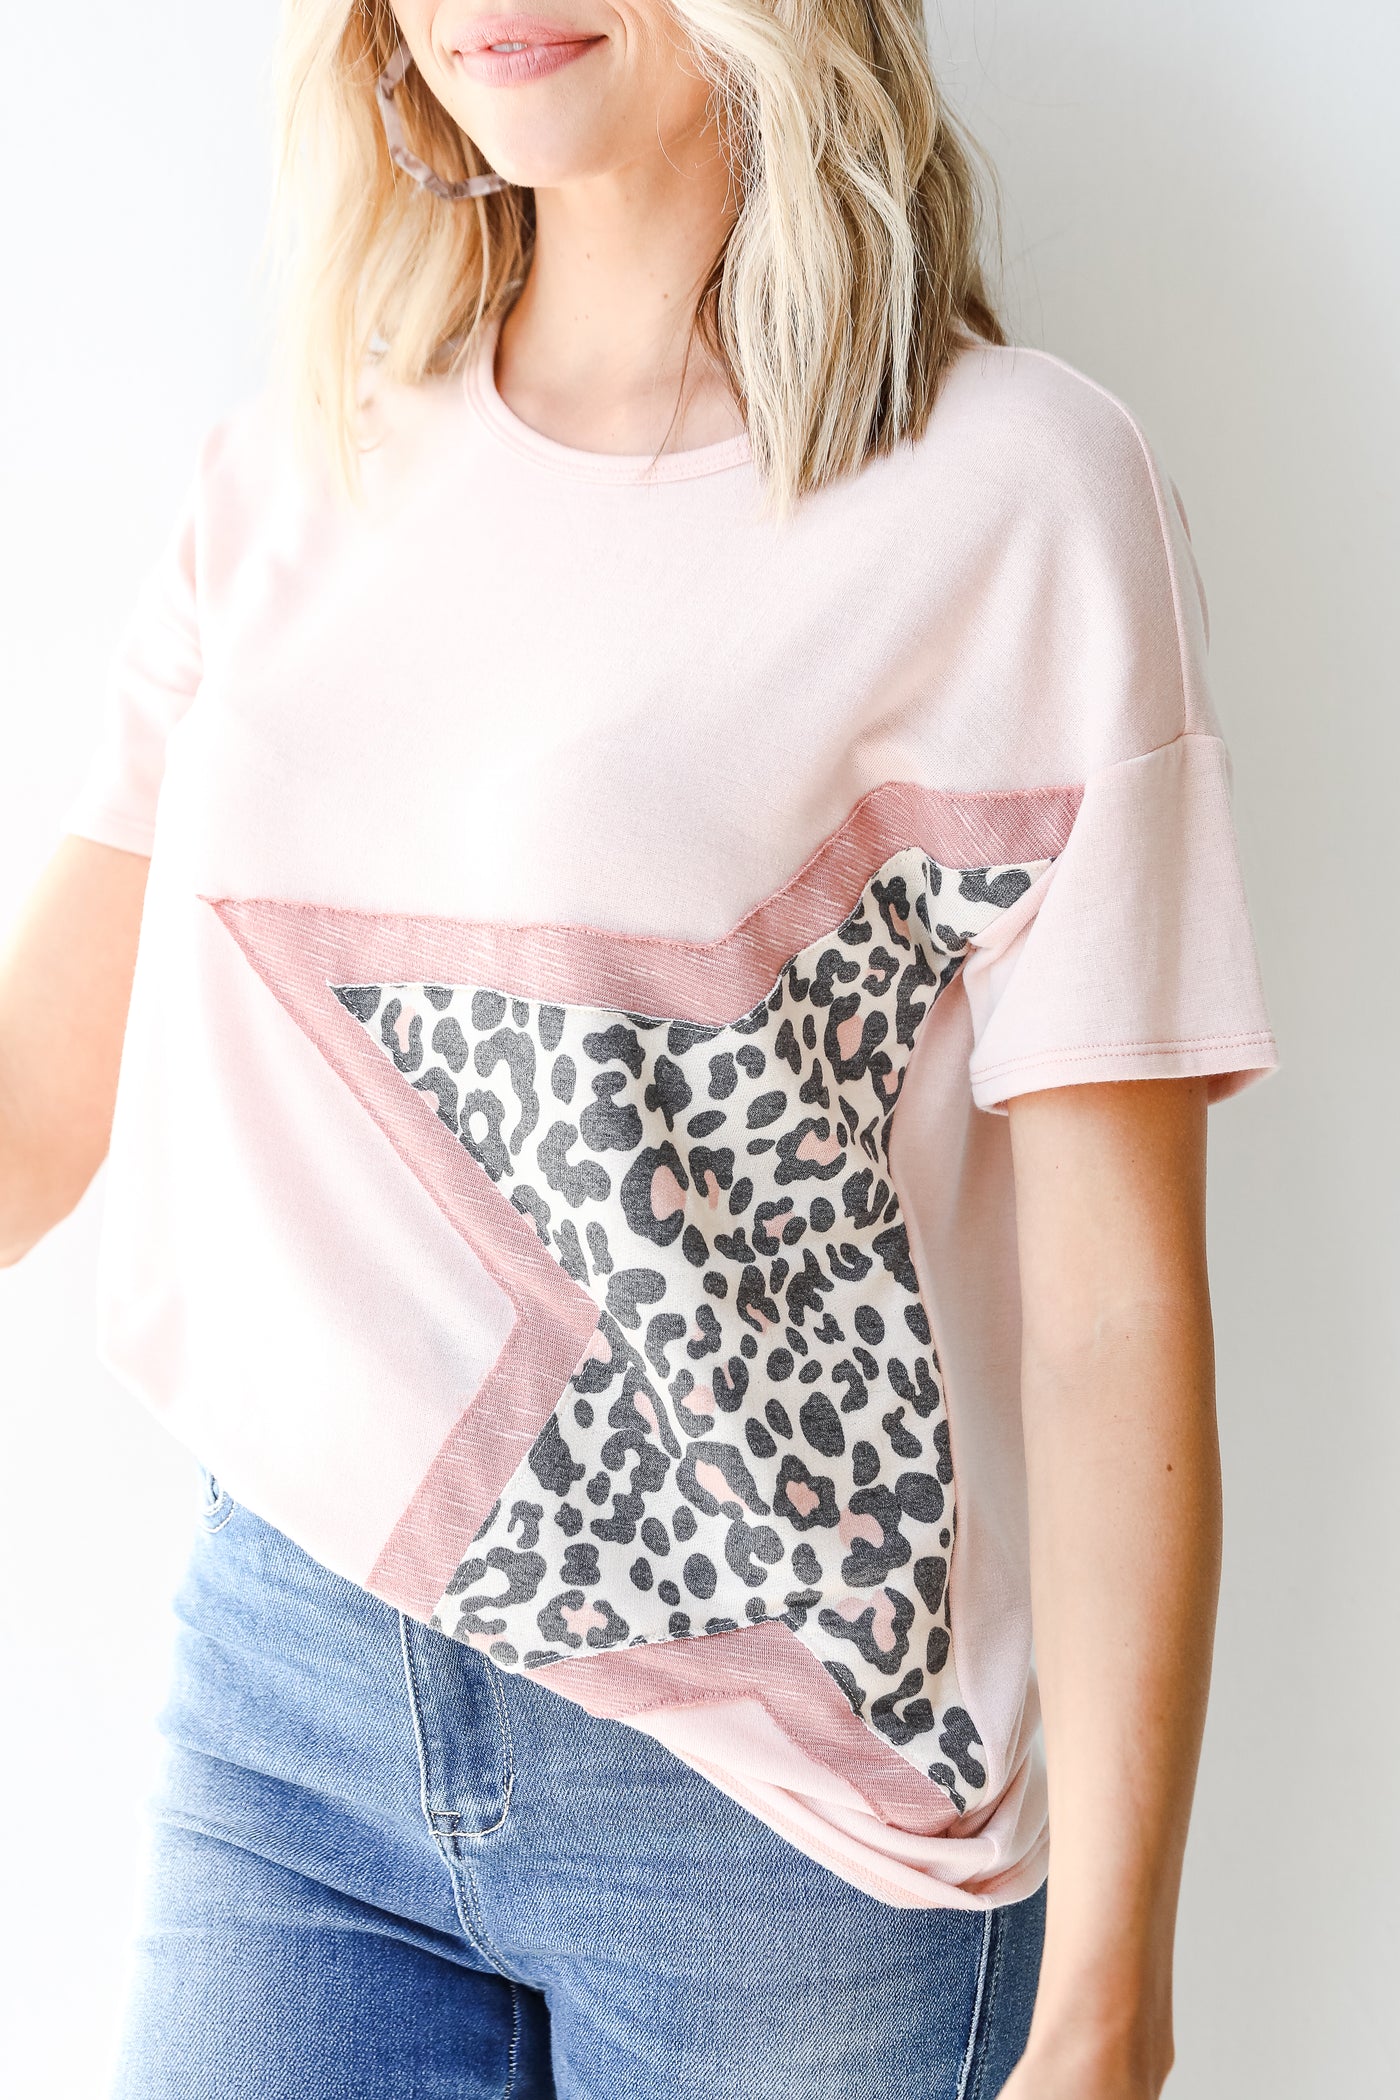 Leopard Star Tee in blush close up